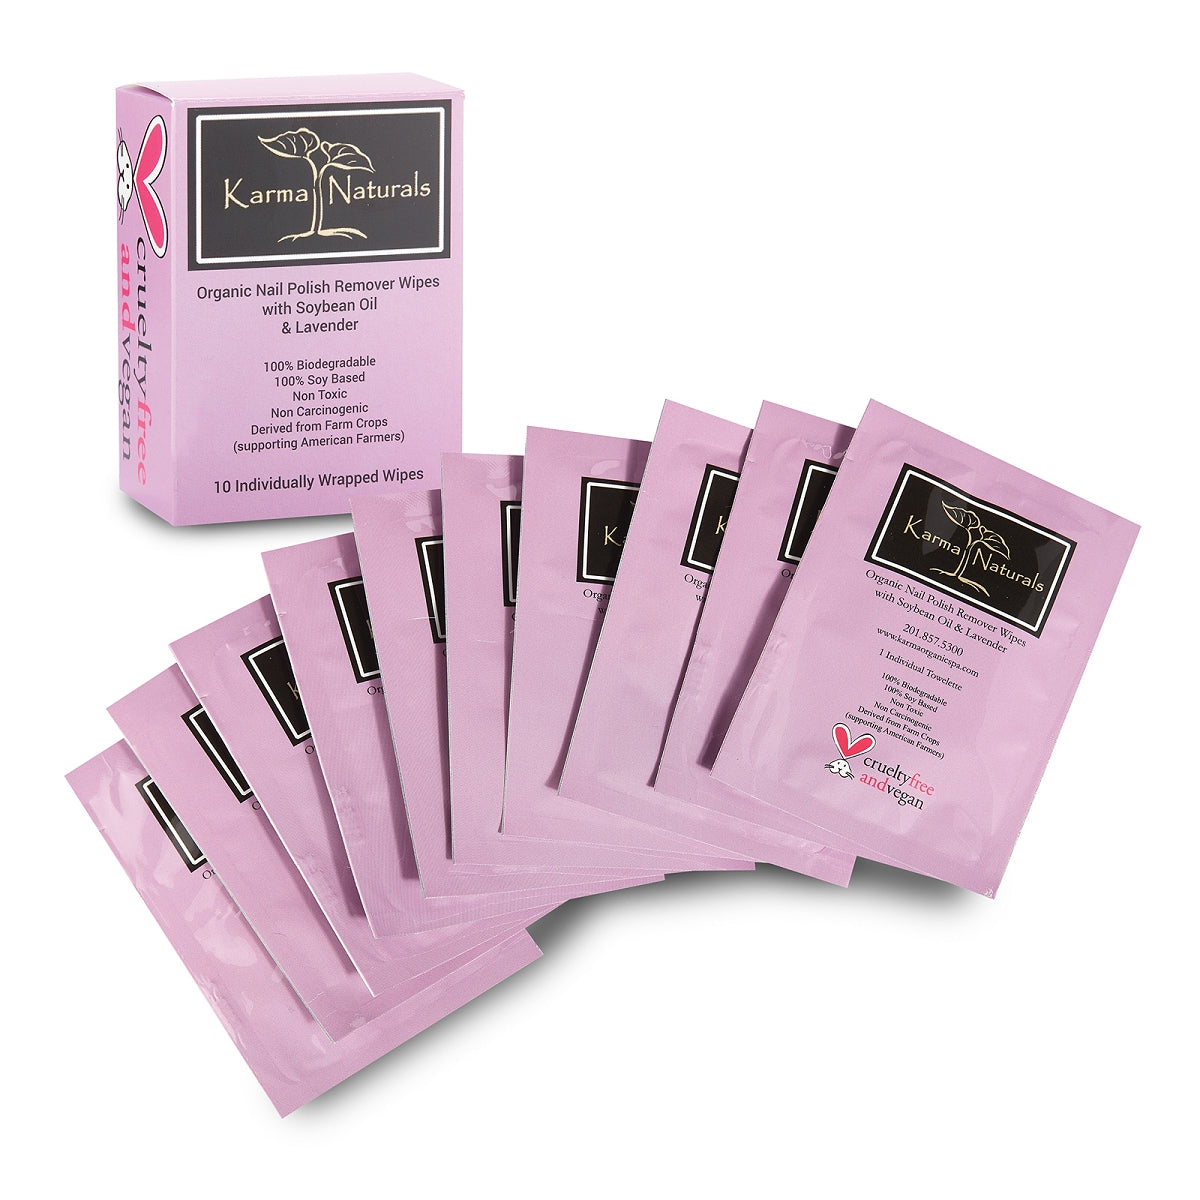 Karma Naturals Nail Polish Remover Wipes with Lavender Oil - 1 Pack of 10 Individually Wrapped Wipes